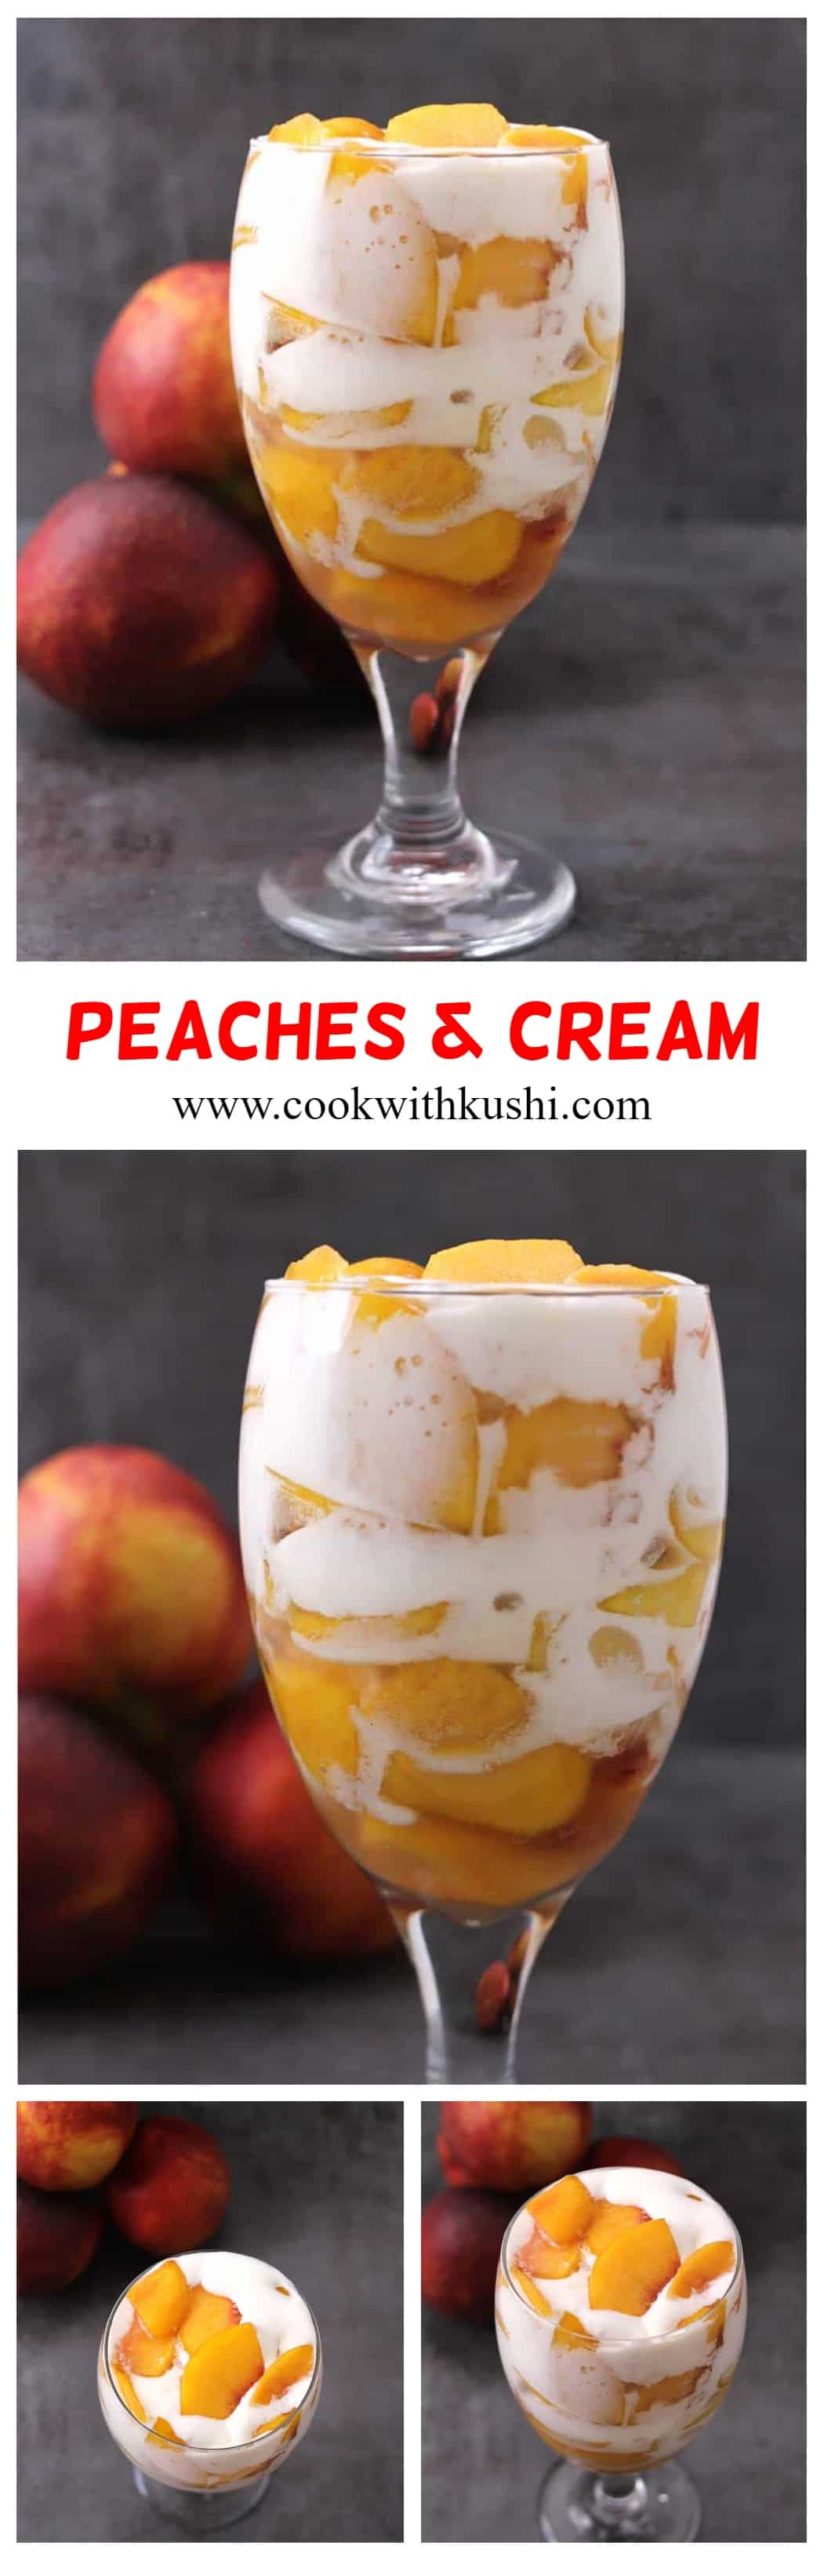 Peaches and Cream Dessert is a simple and easy to make classic summer treat prepared using fresh peaches and whipping cream. #peachdesserts #peachcobbler #peachparfait #peachtrifle #peaches #peachrecipes #freshpeaches #summerrecipes #summerfoodideas